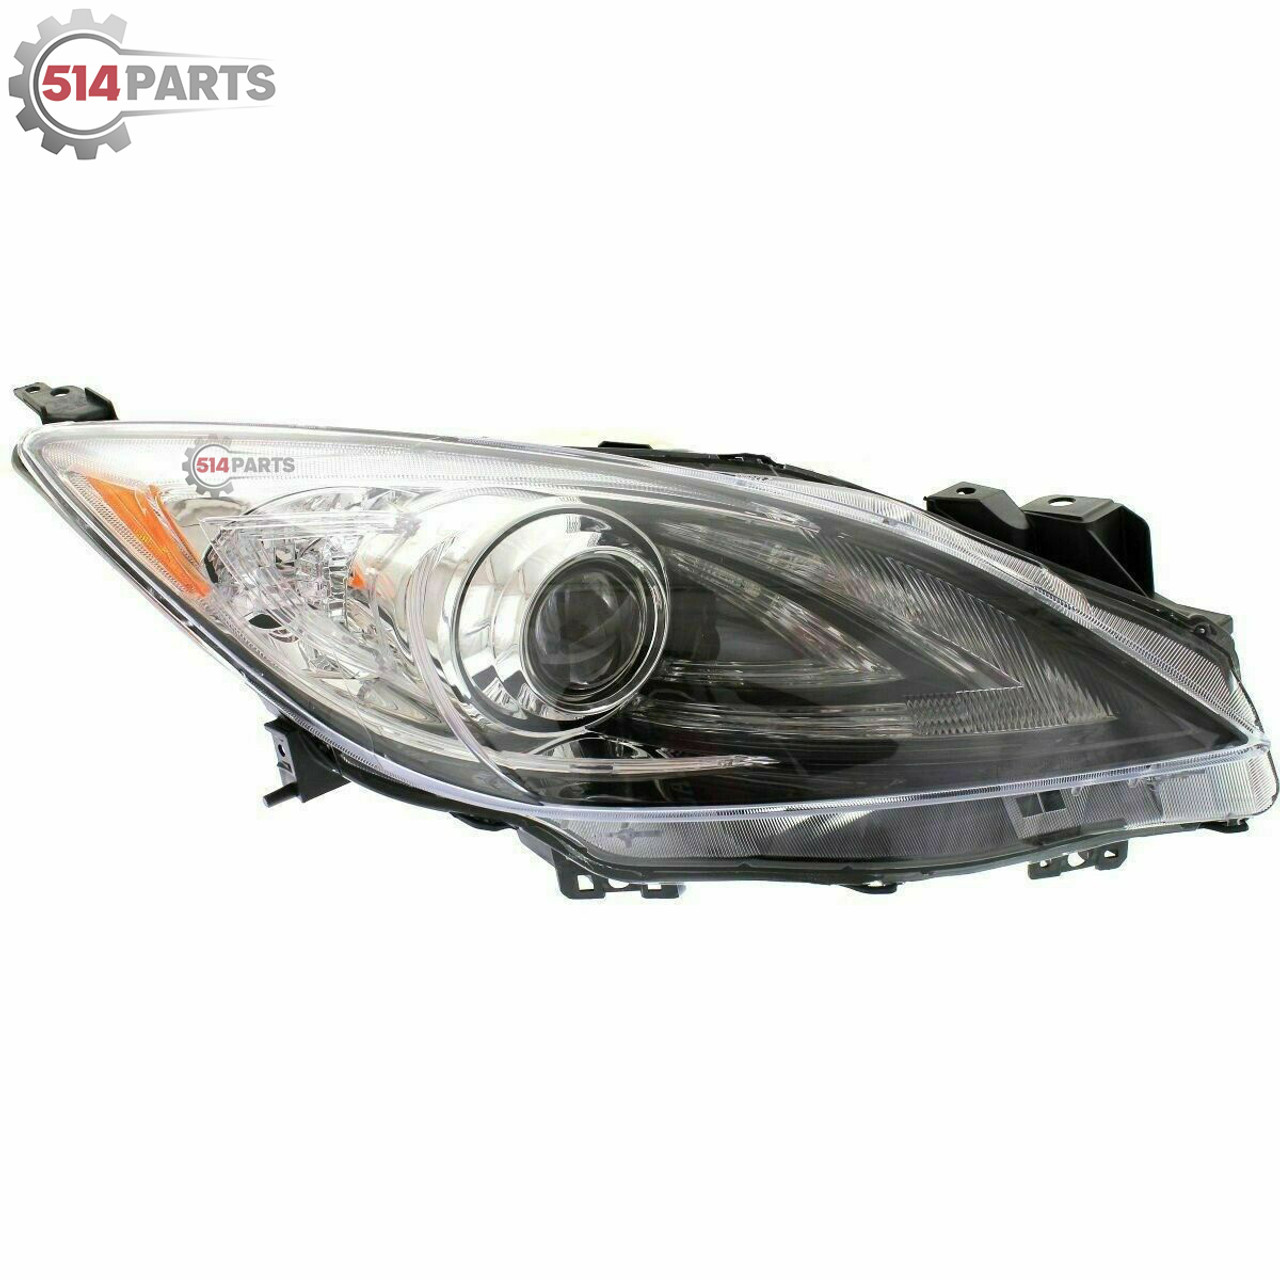 2010 - 2011 MAZDA 3 and MAZDA 3 SPORT(CANADA) HID without AUTO LEVEL CONTROL HEADLIGHTS without DRL High Quality - PHARES AVANT DIH sans DRL sans CONTROLE AUTOMATIQUE DU NIVEAU Haute Qualite